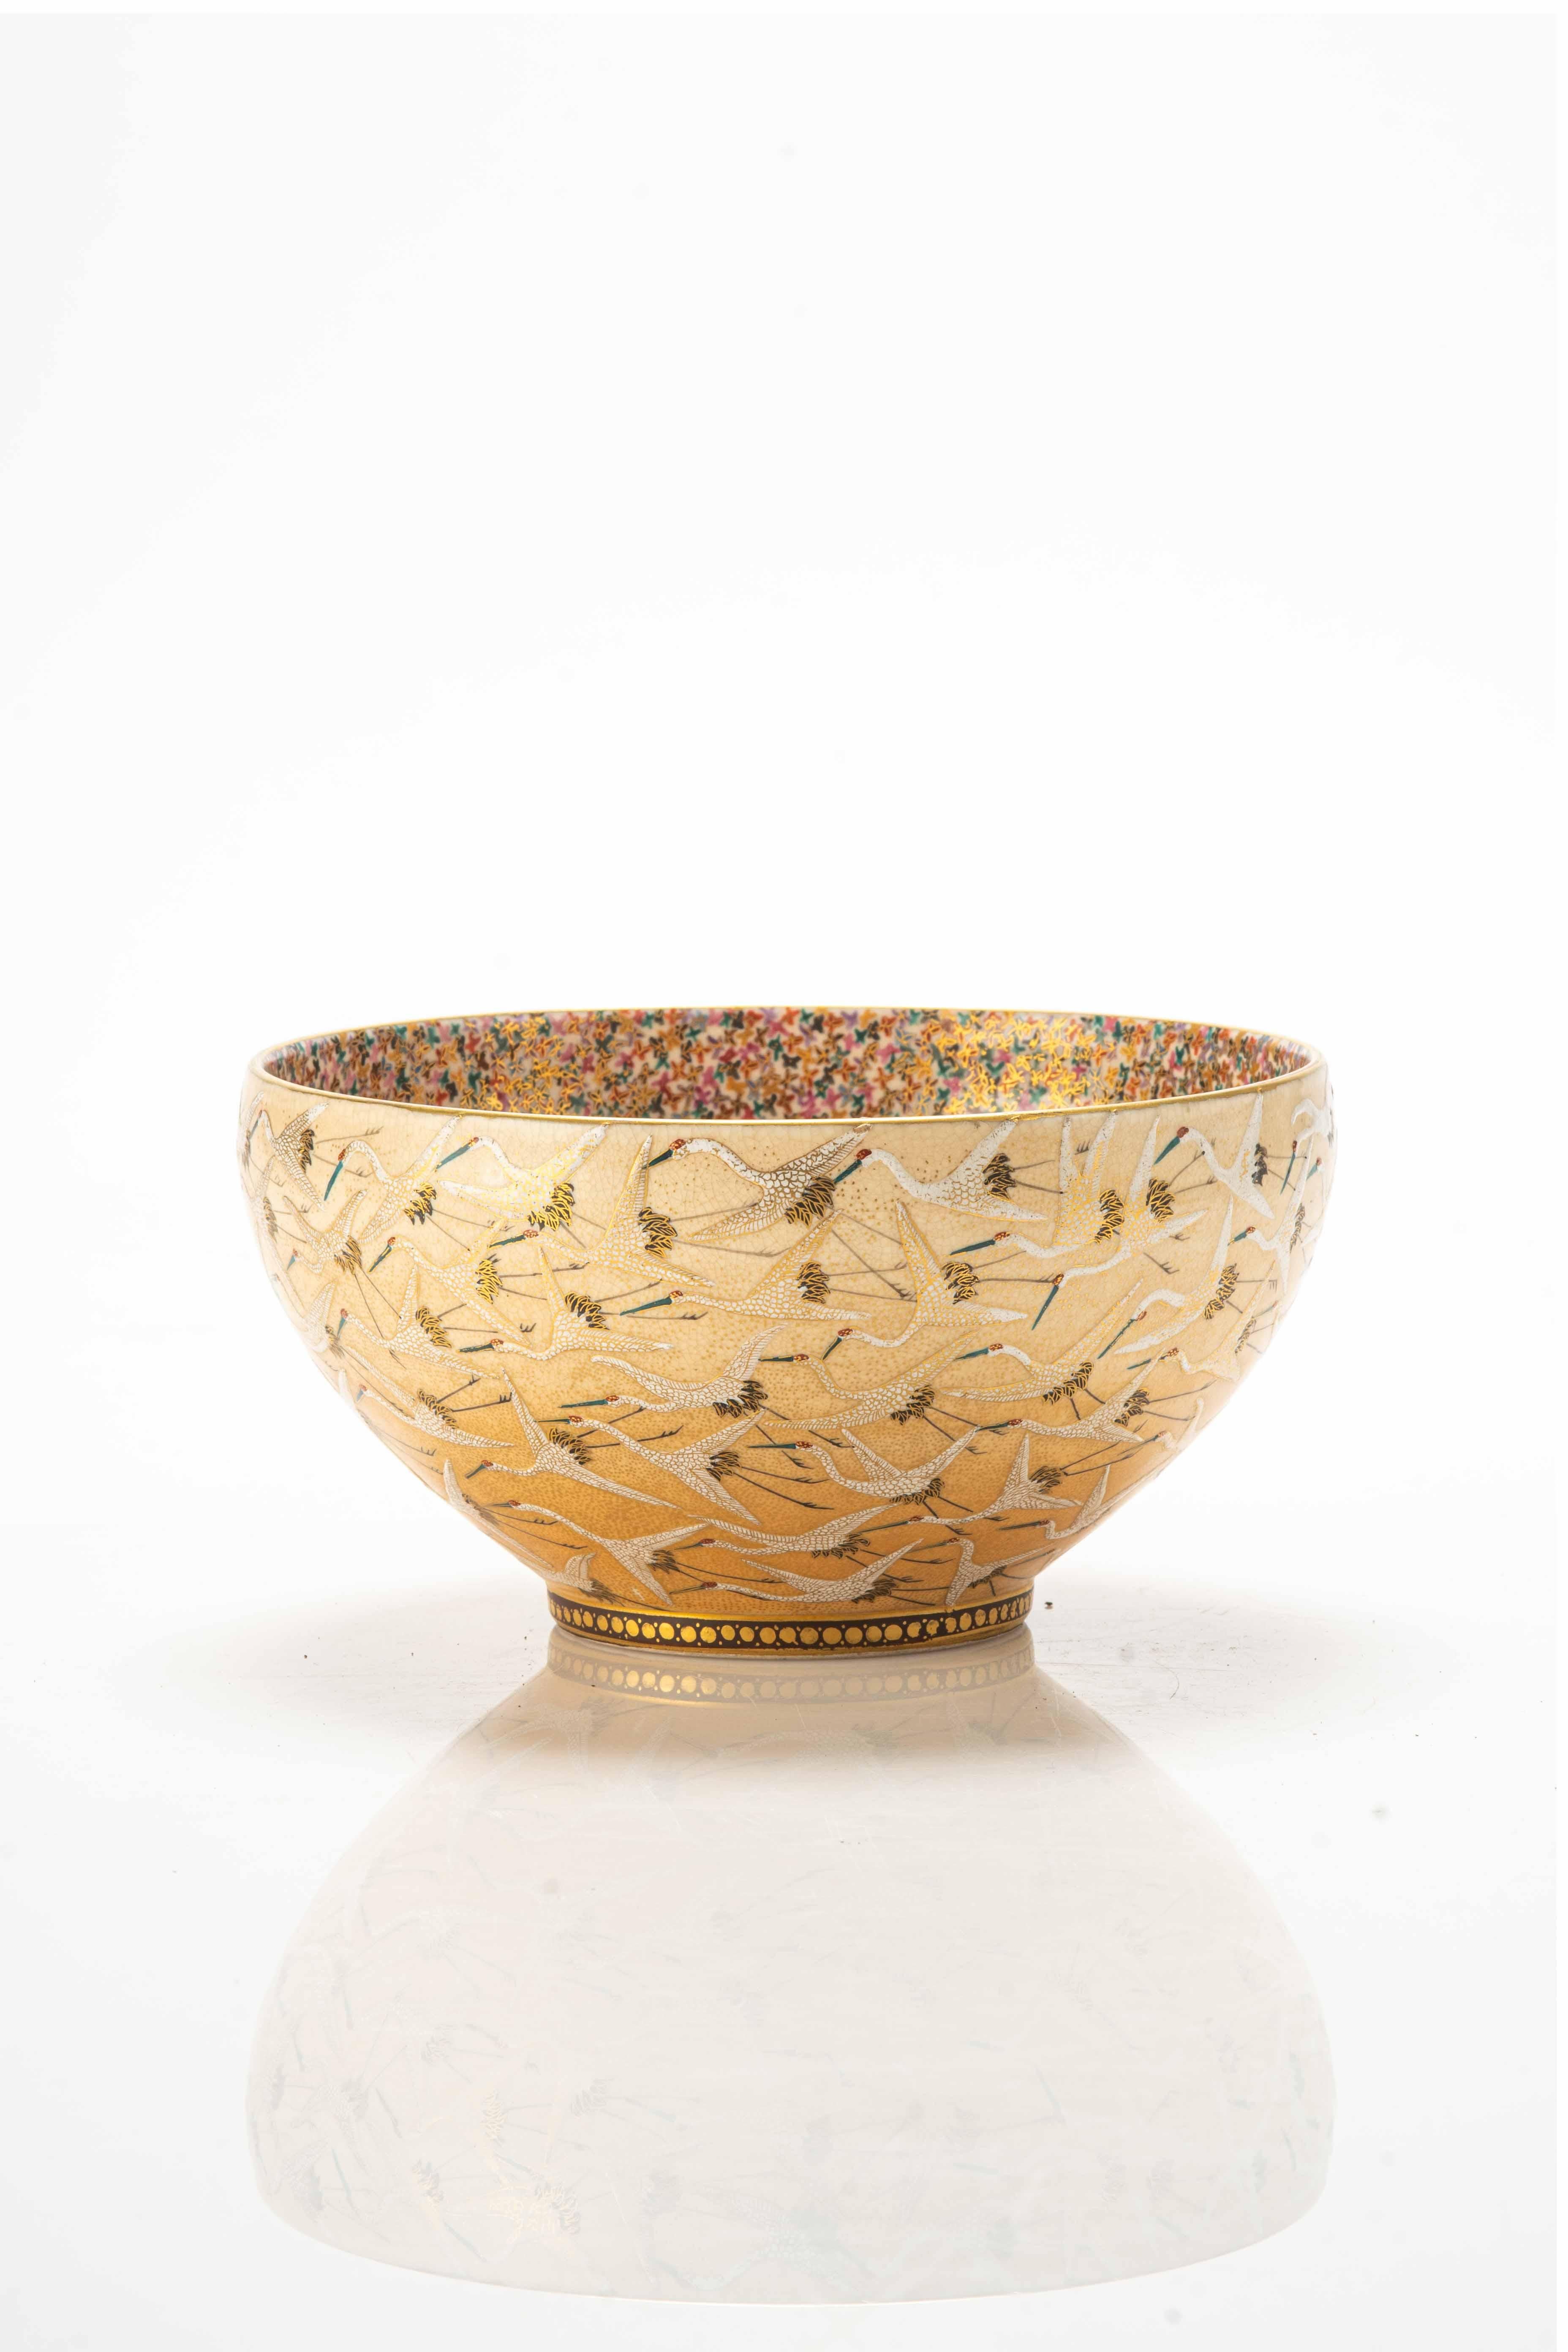 Satsuma ceramic bowl adorned with relief glazes and gold details depicting a motif of Manchurian Cranes in flight, symbols of longevity and happiness in Japanese culture.

Inside, the bowl features a dense motif of a thousand butterflies, often